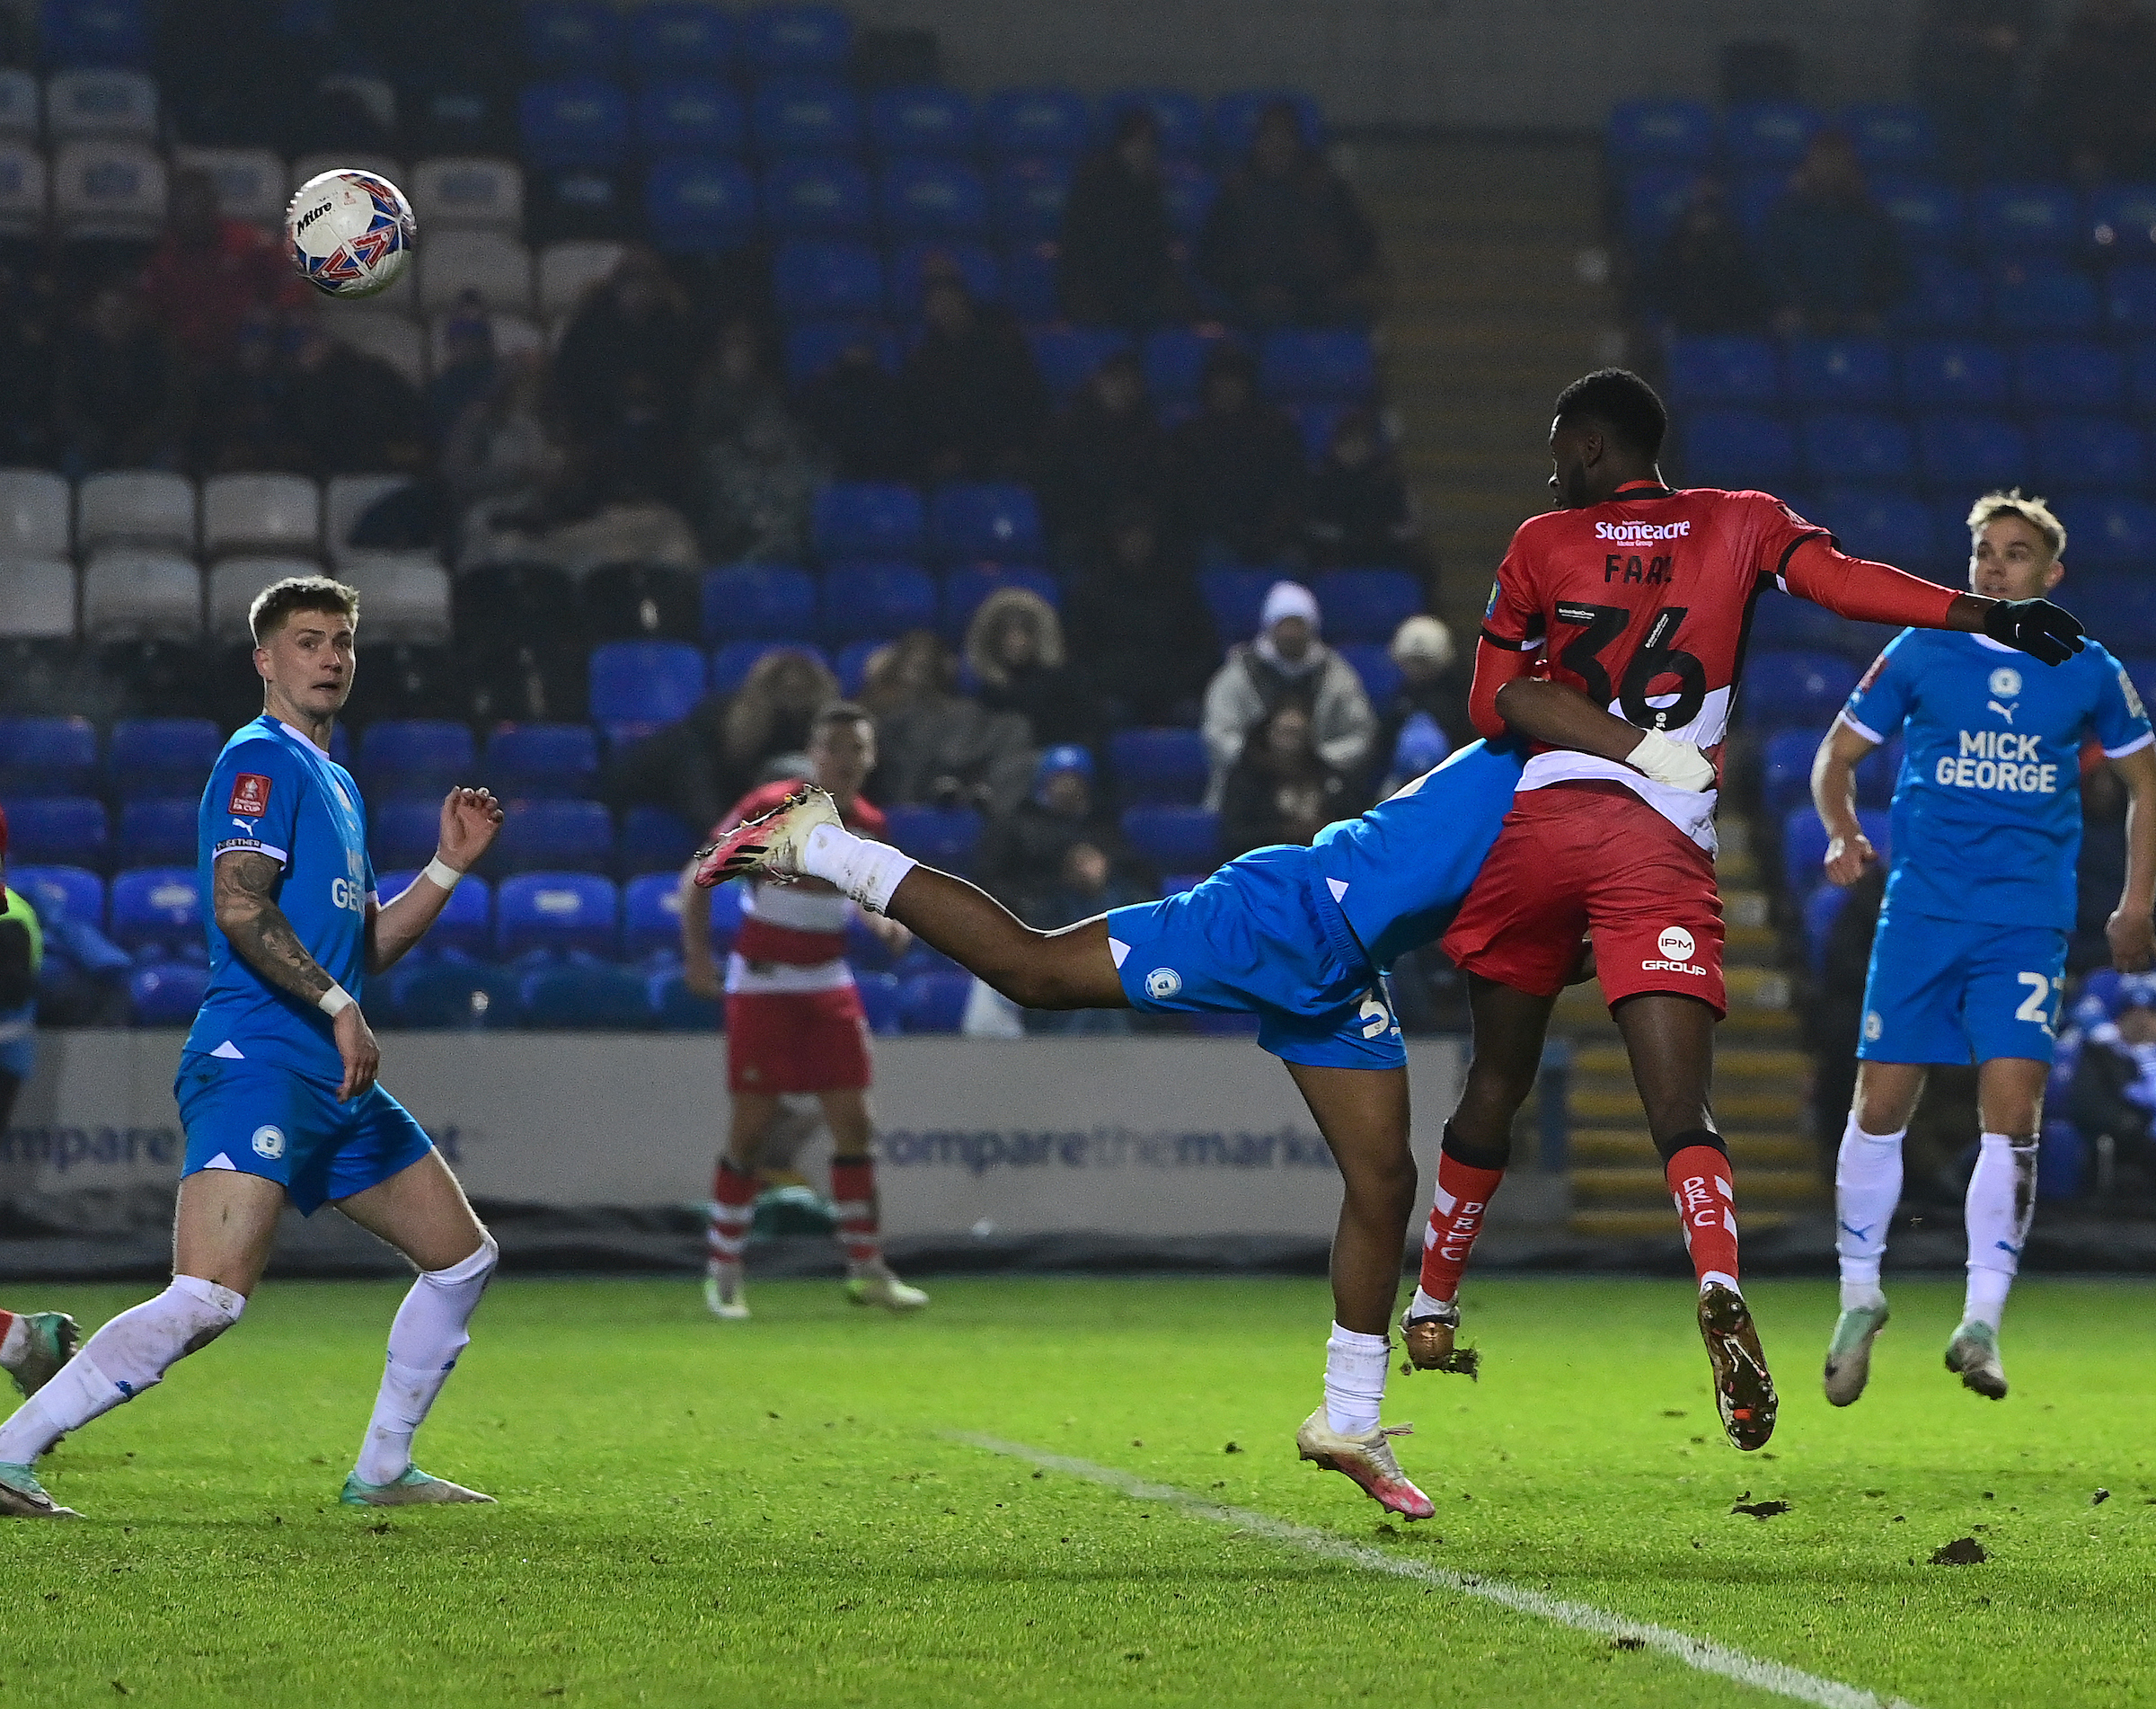 A photo of striker Mo Faal heading in a goal for loan side Doncaster v Peterborough at the Weston Homes Stadium